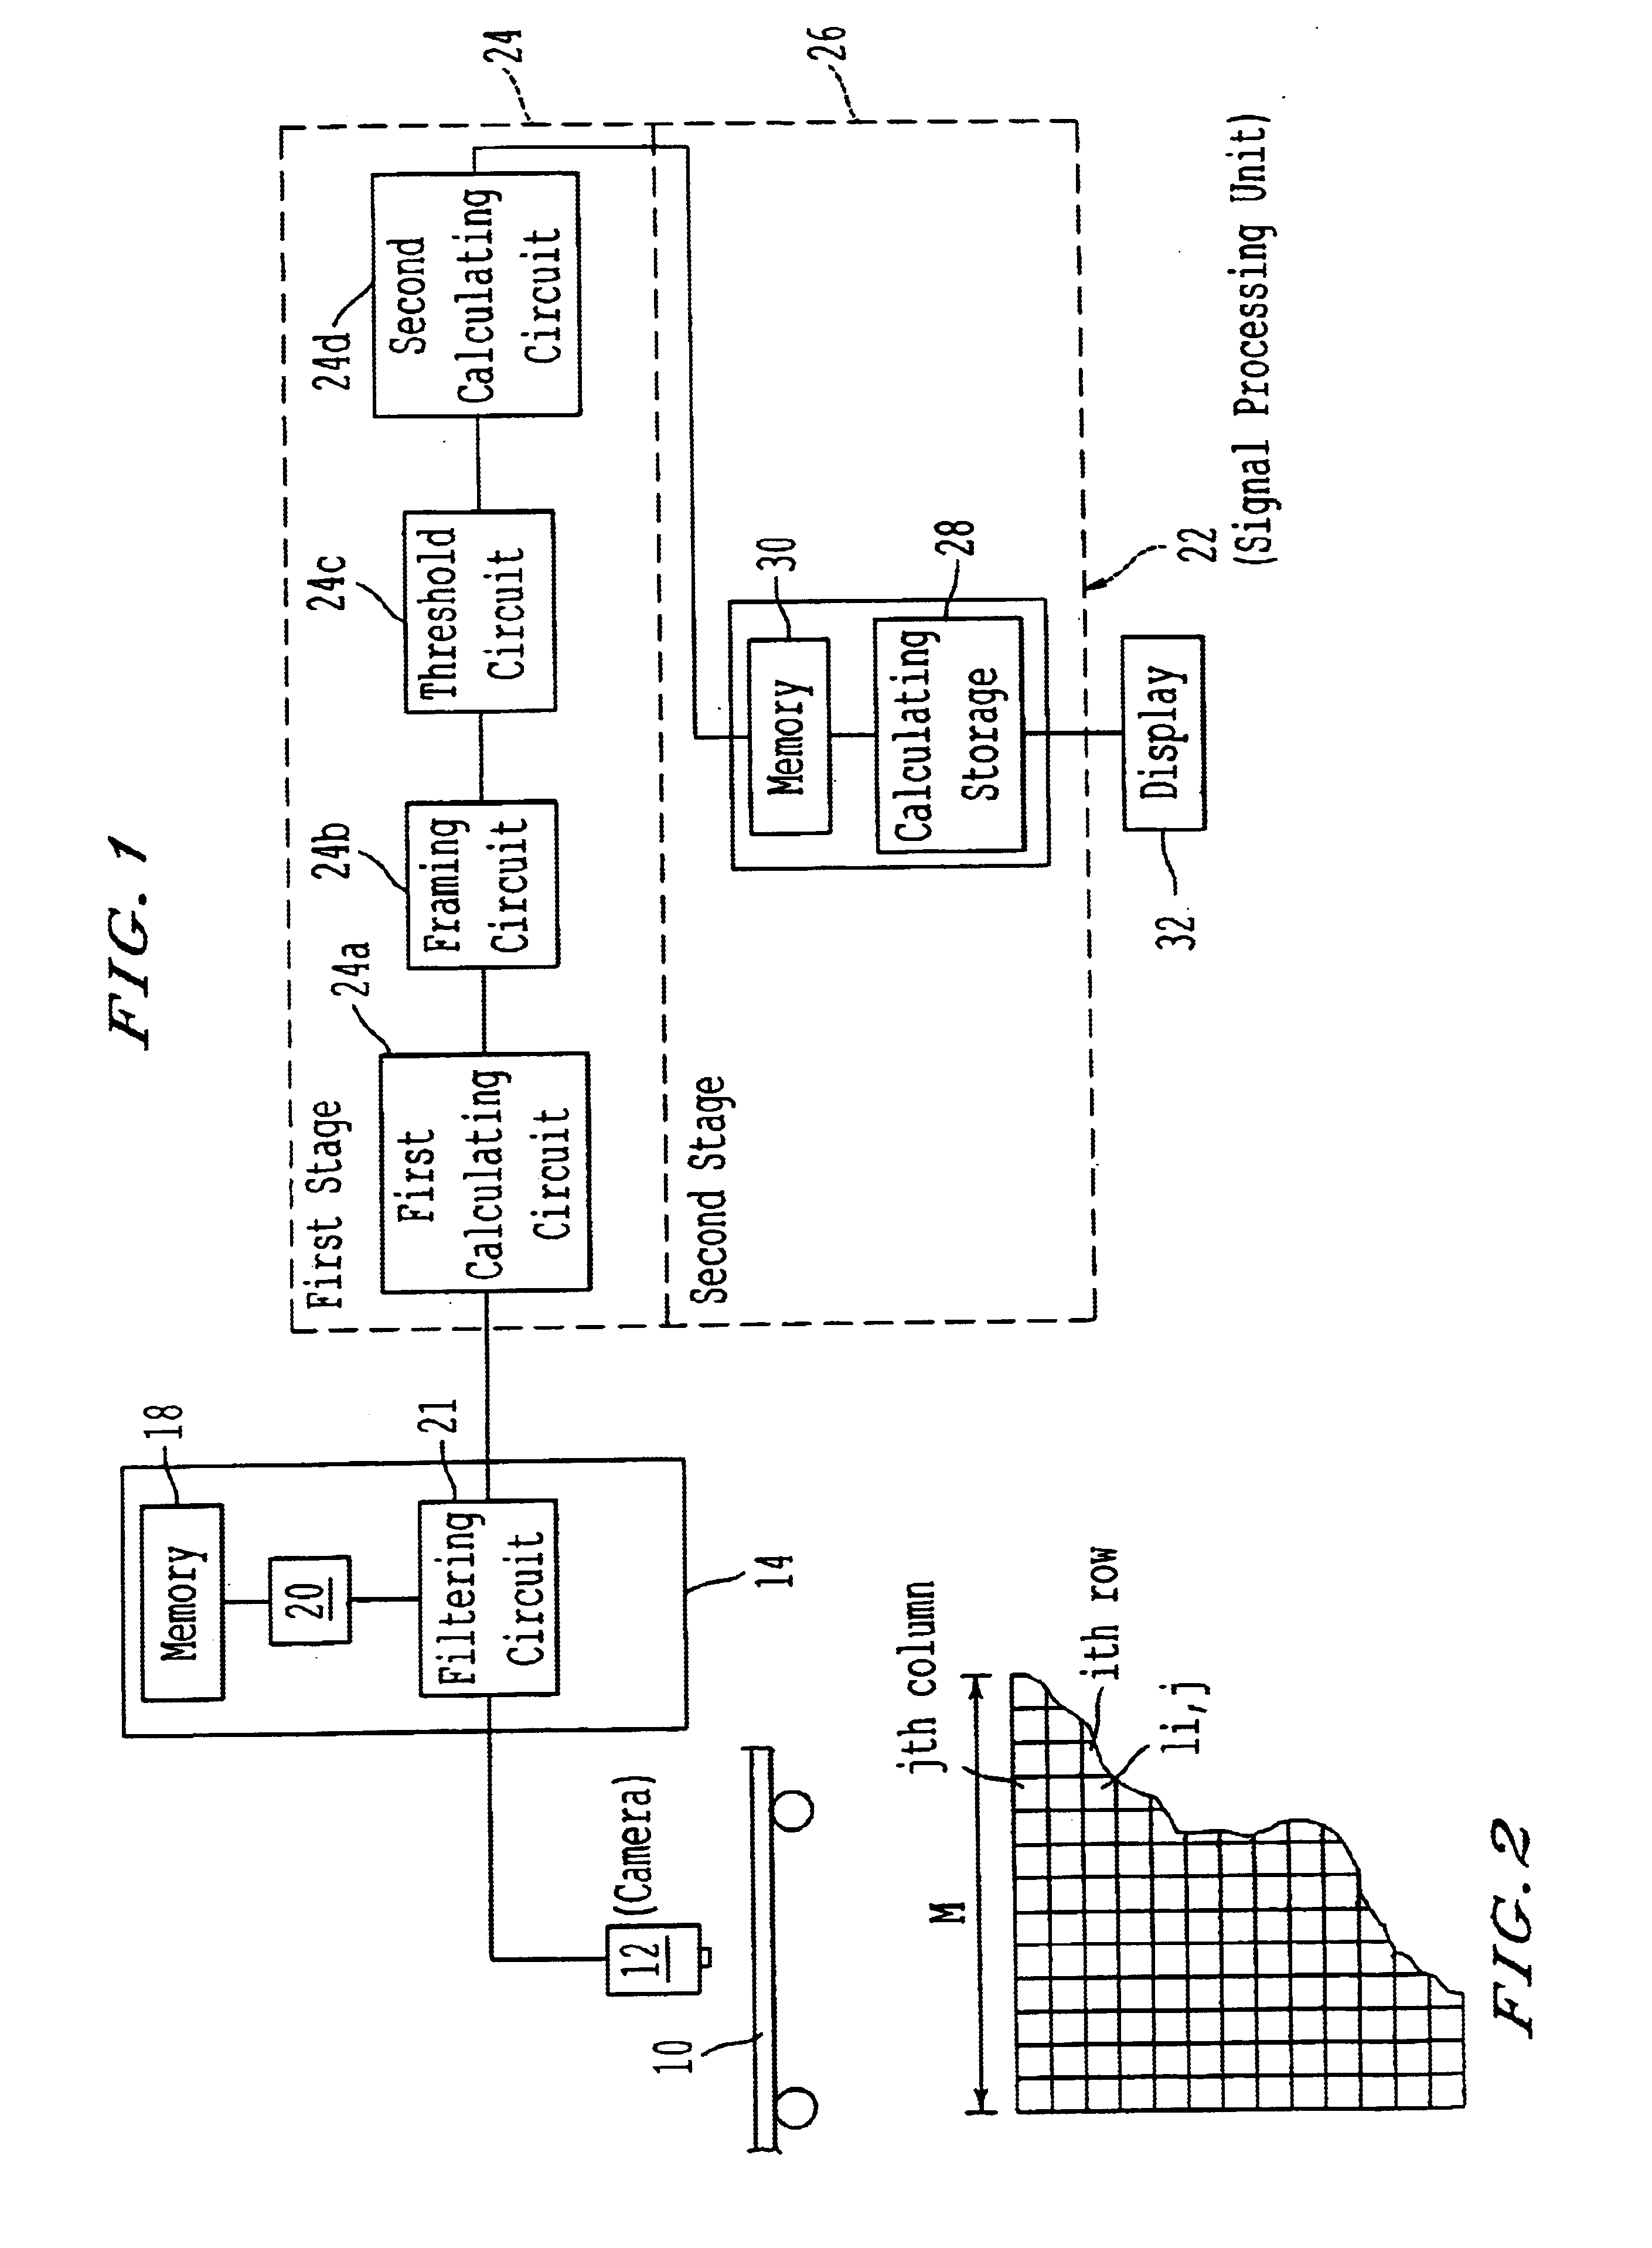 Method for inspecting the surface of a moving strip by prior classification of the detected surface irregularity